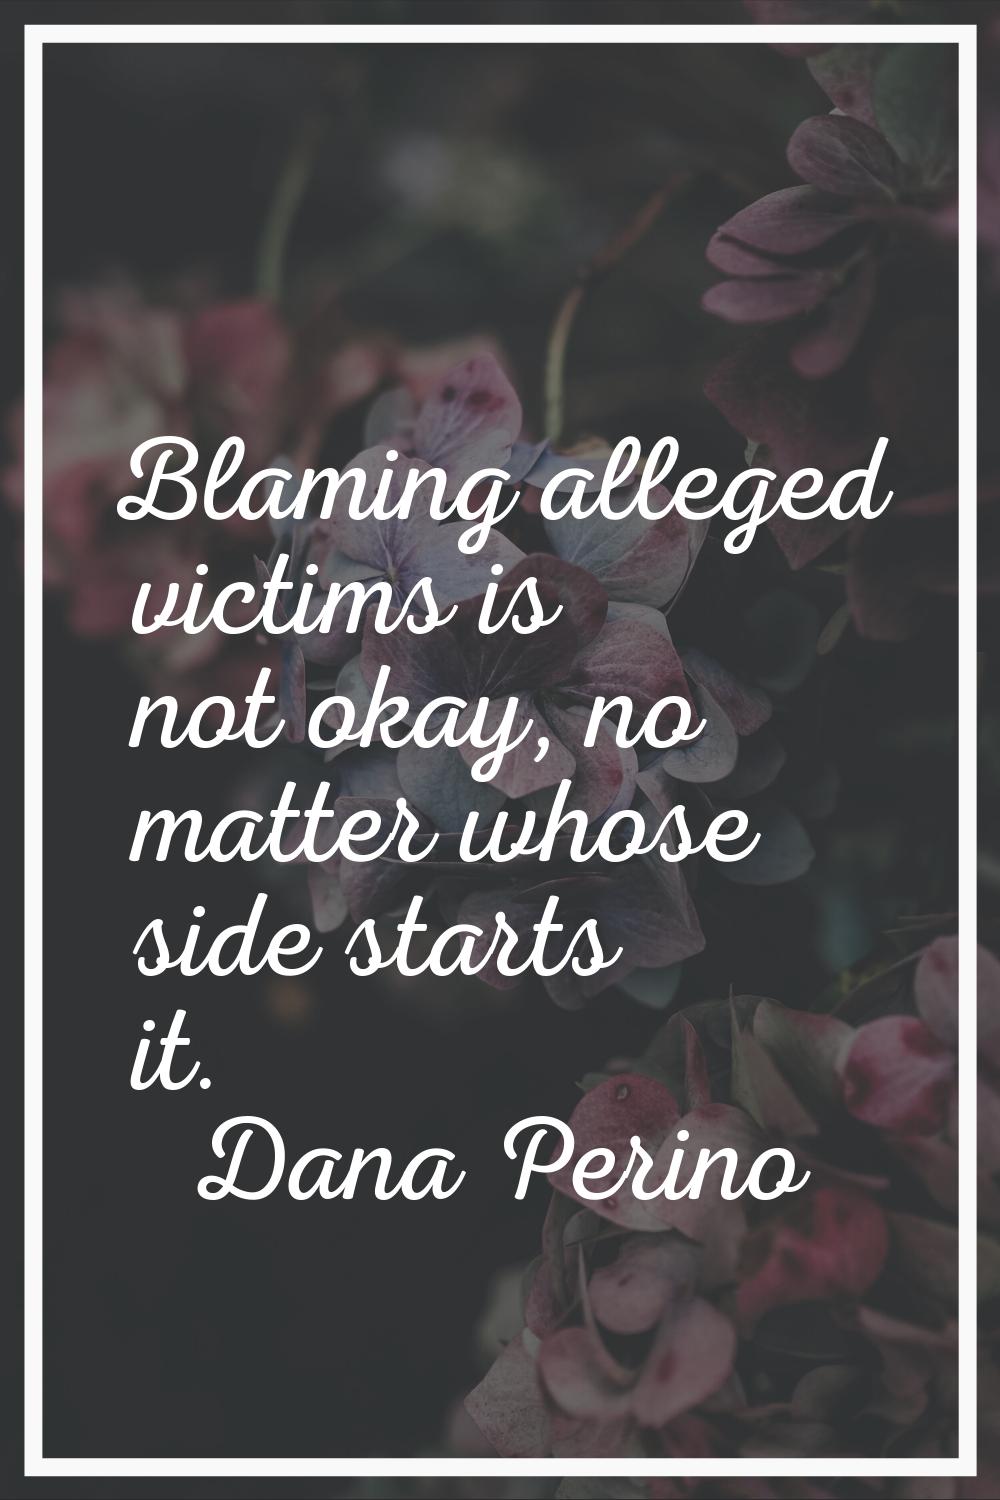 Blaming alleged victims is not okay, no matter whose side starts it.